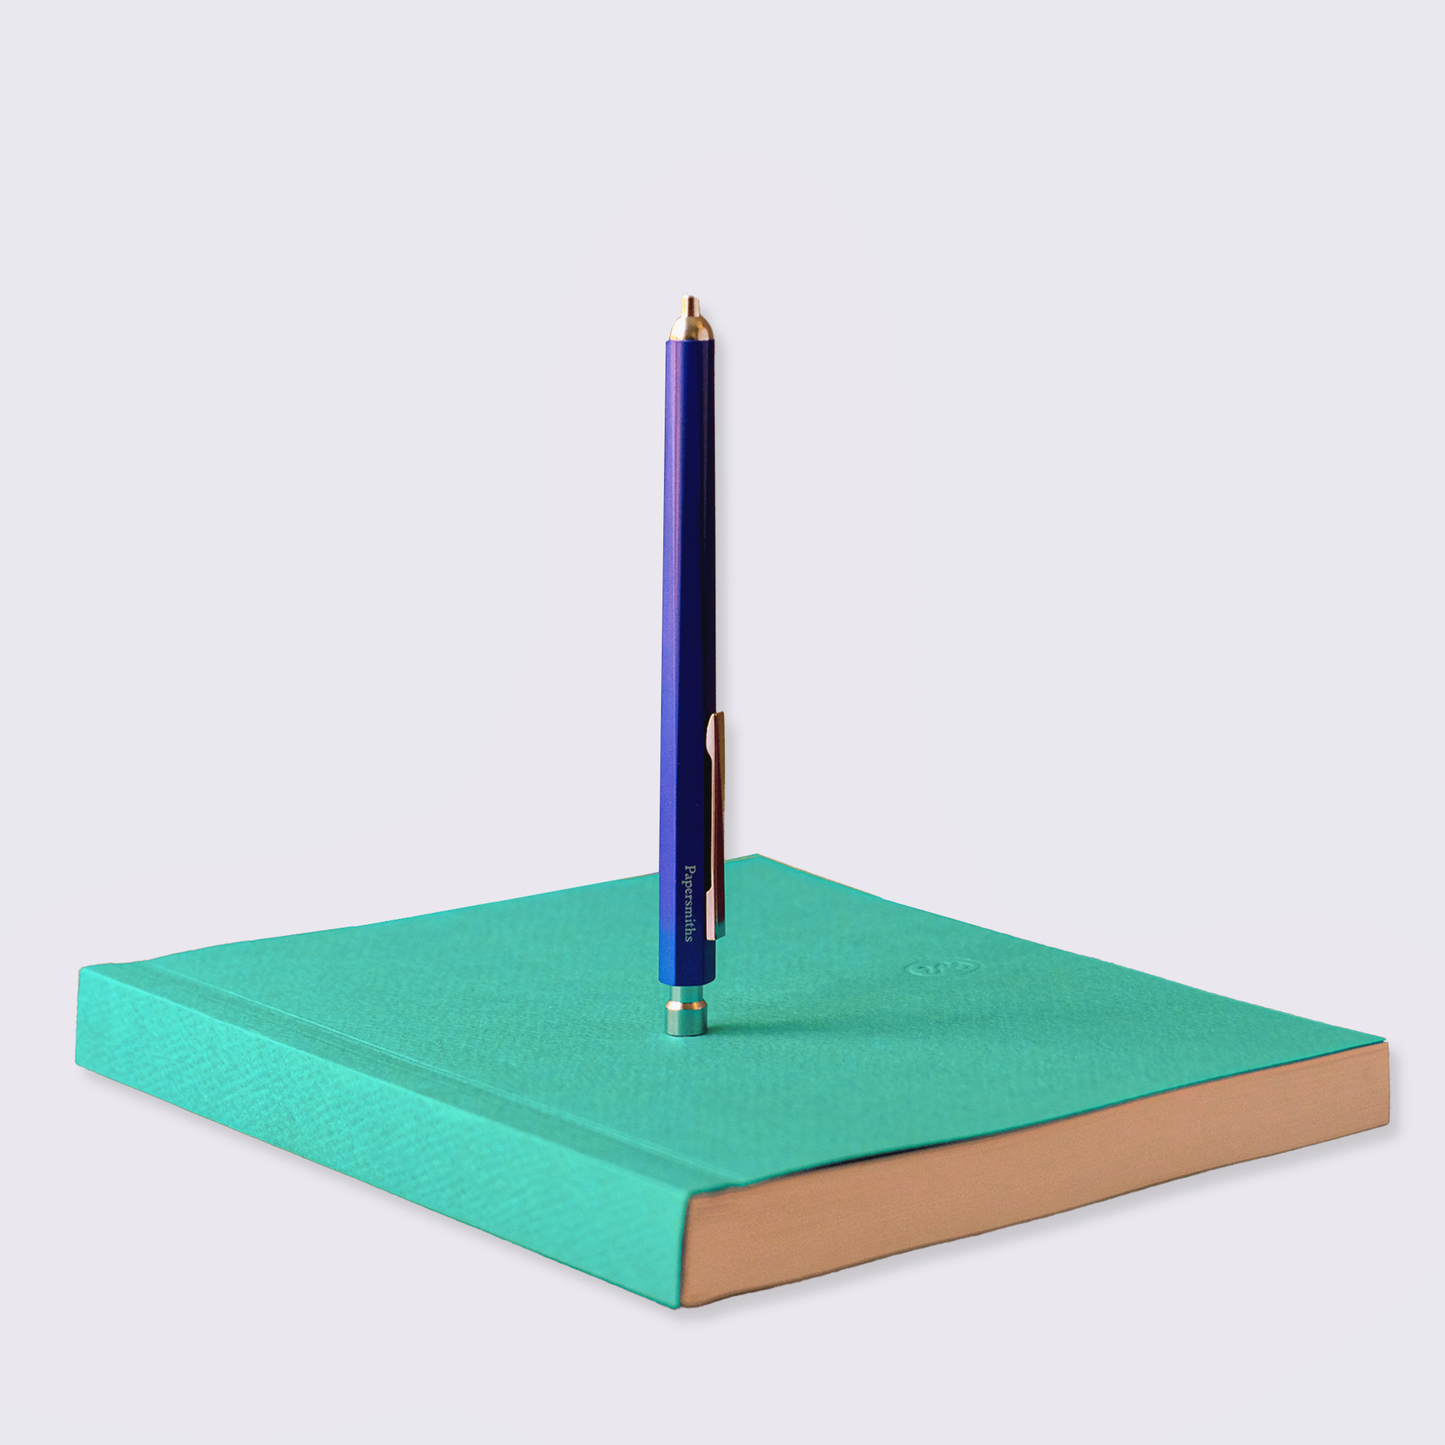 Calypso Notebook and Pen Duo - Primo Ballpoint Pen / Ruled Paper